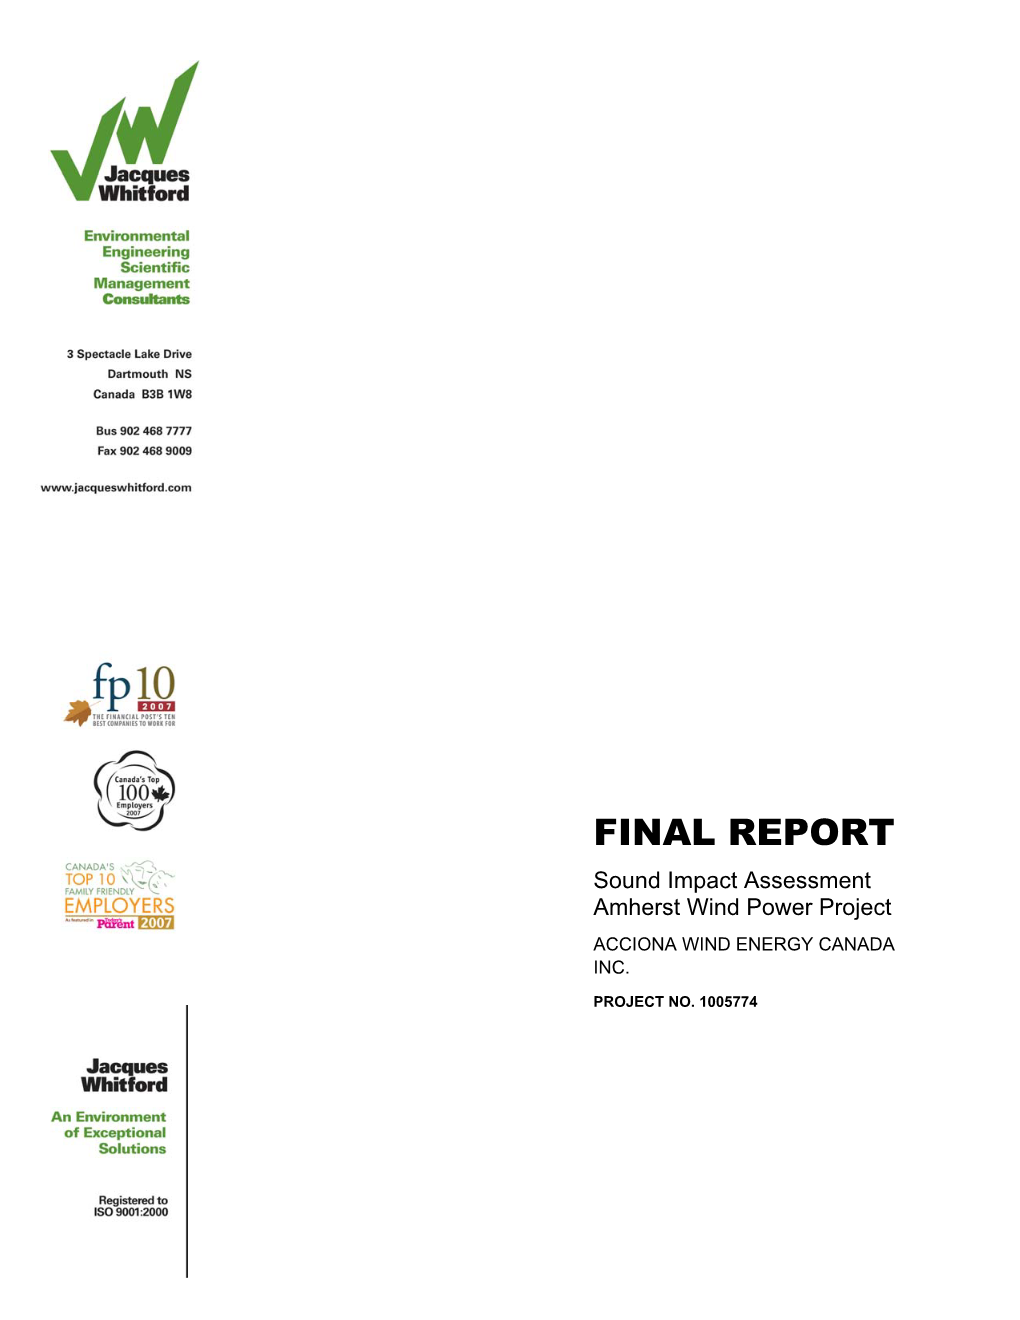 FINAL REPORT Sound Impact Assessment Amherst Wind Power Project ACCIONA WIND ENERGY CANADA INC